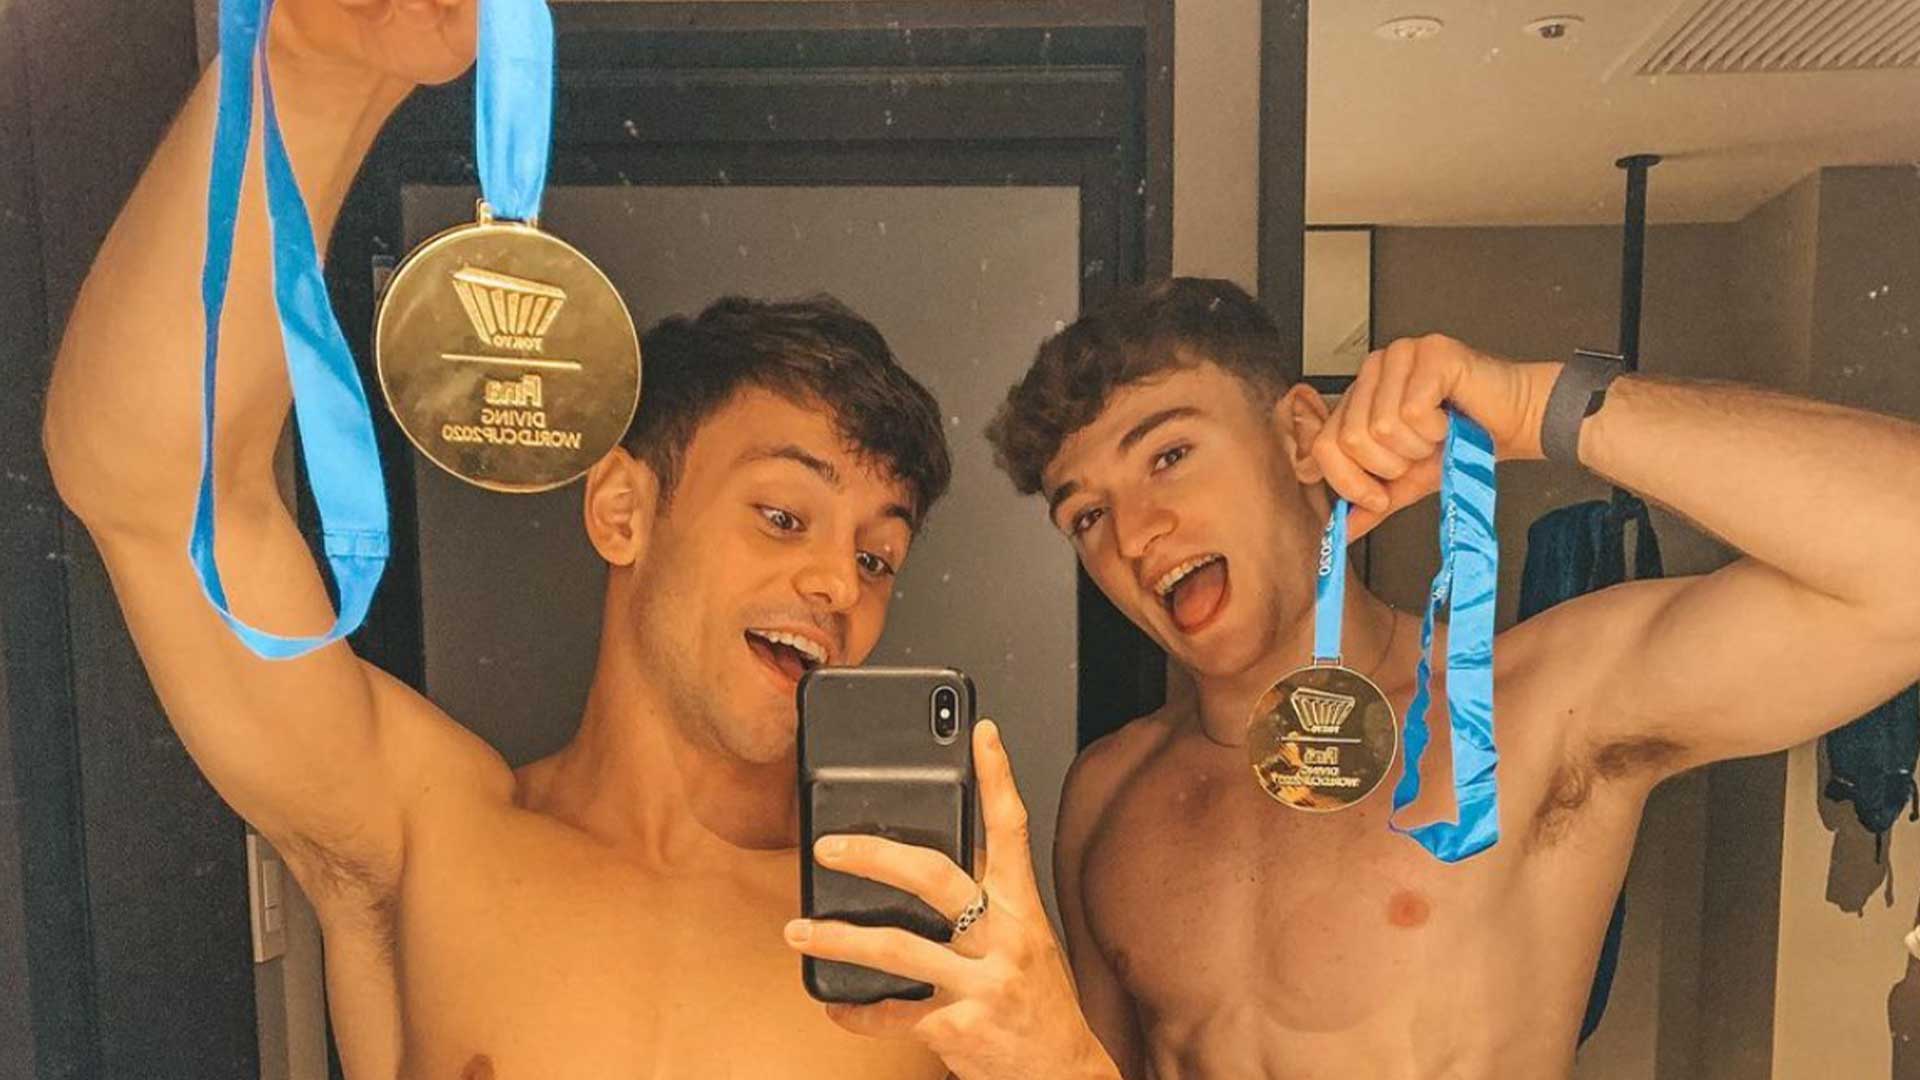 Tom Daley and Matty Lee posing with medals in a mirror